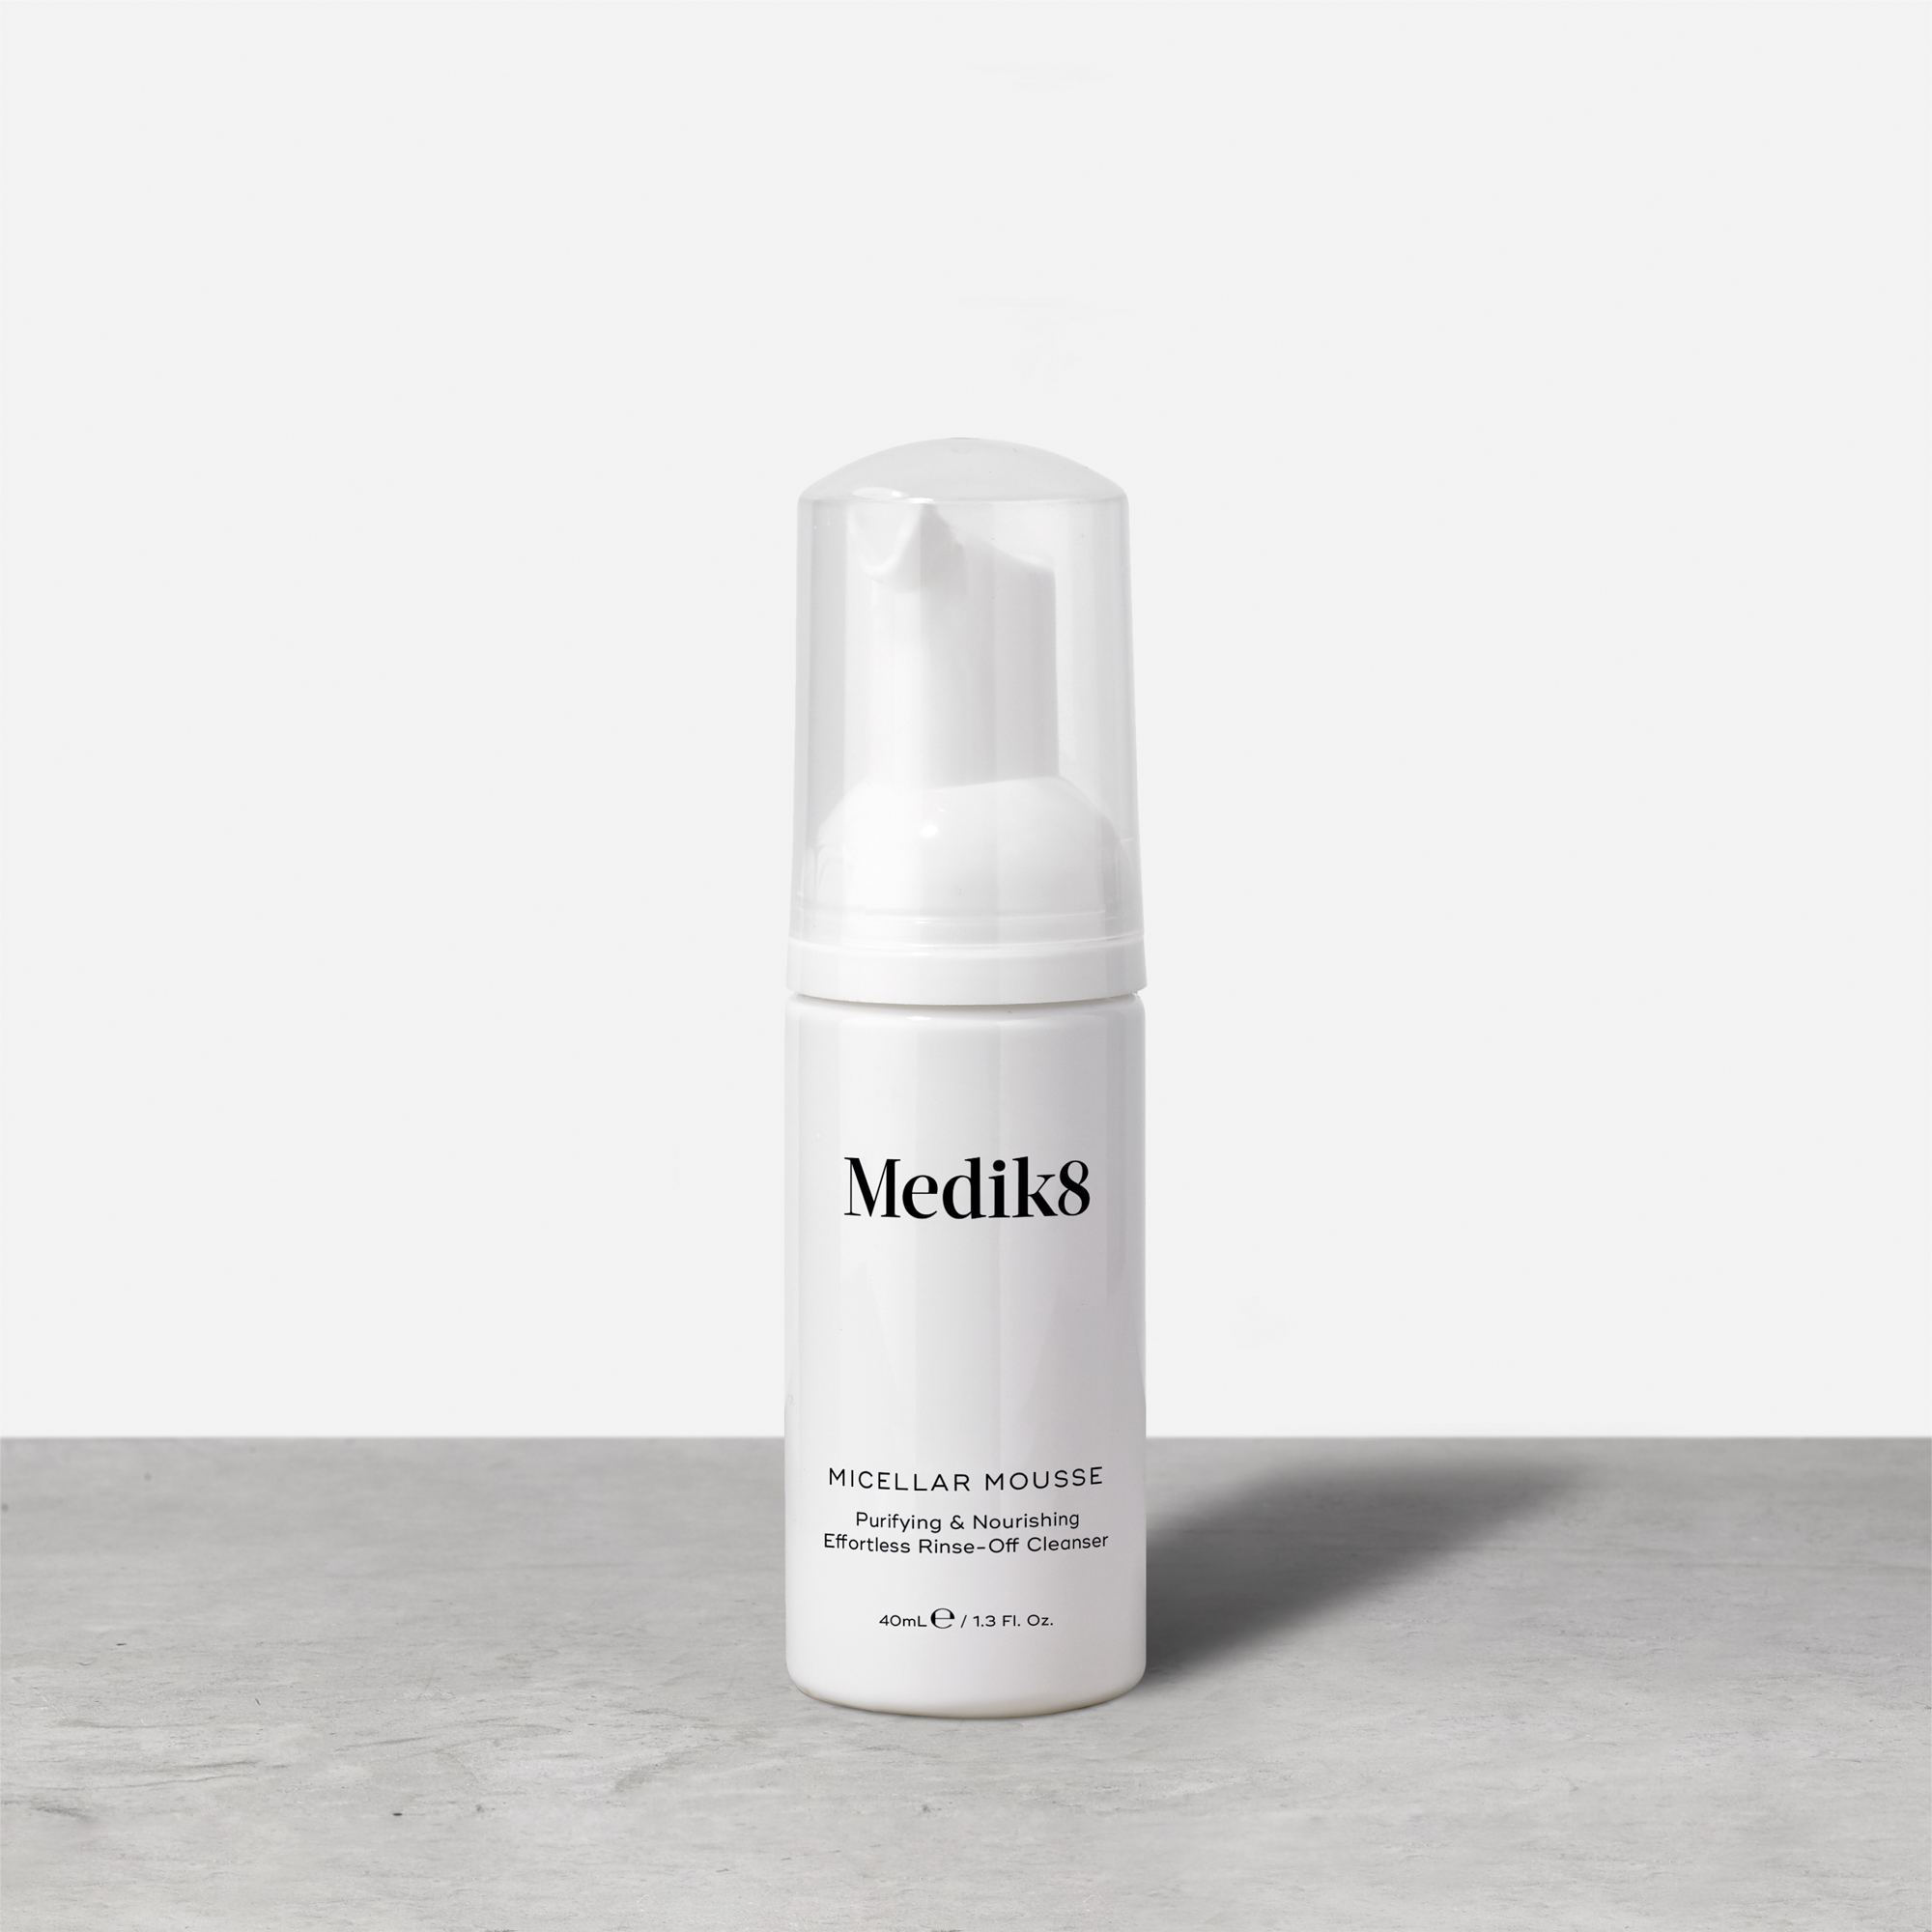 Try Me Size Micellar Mousse™ 40ml